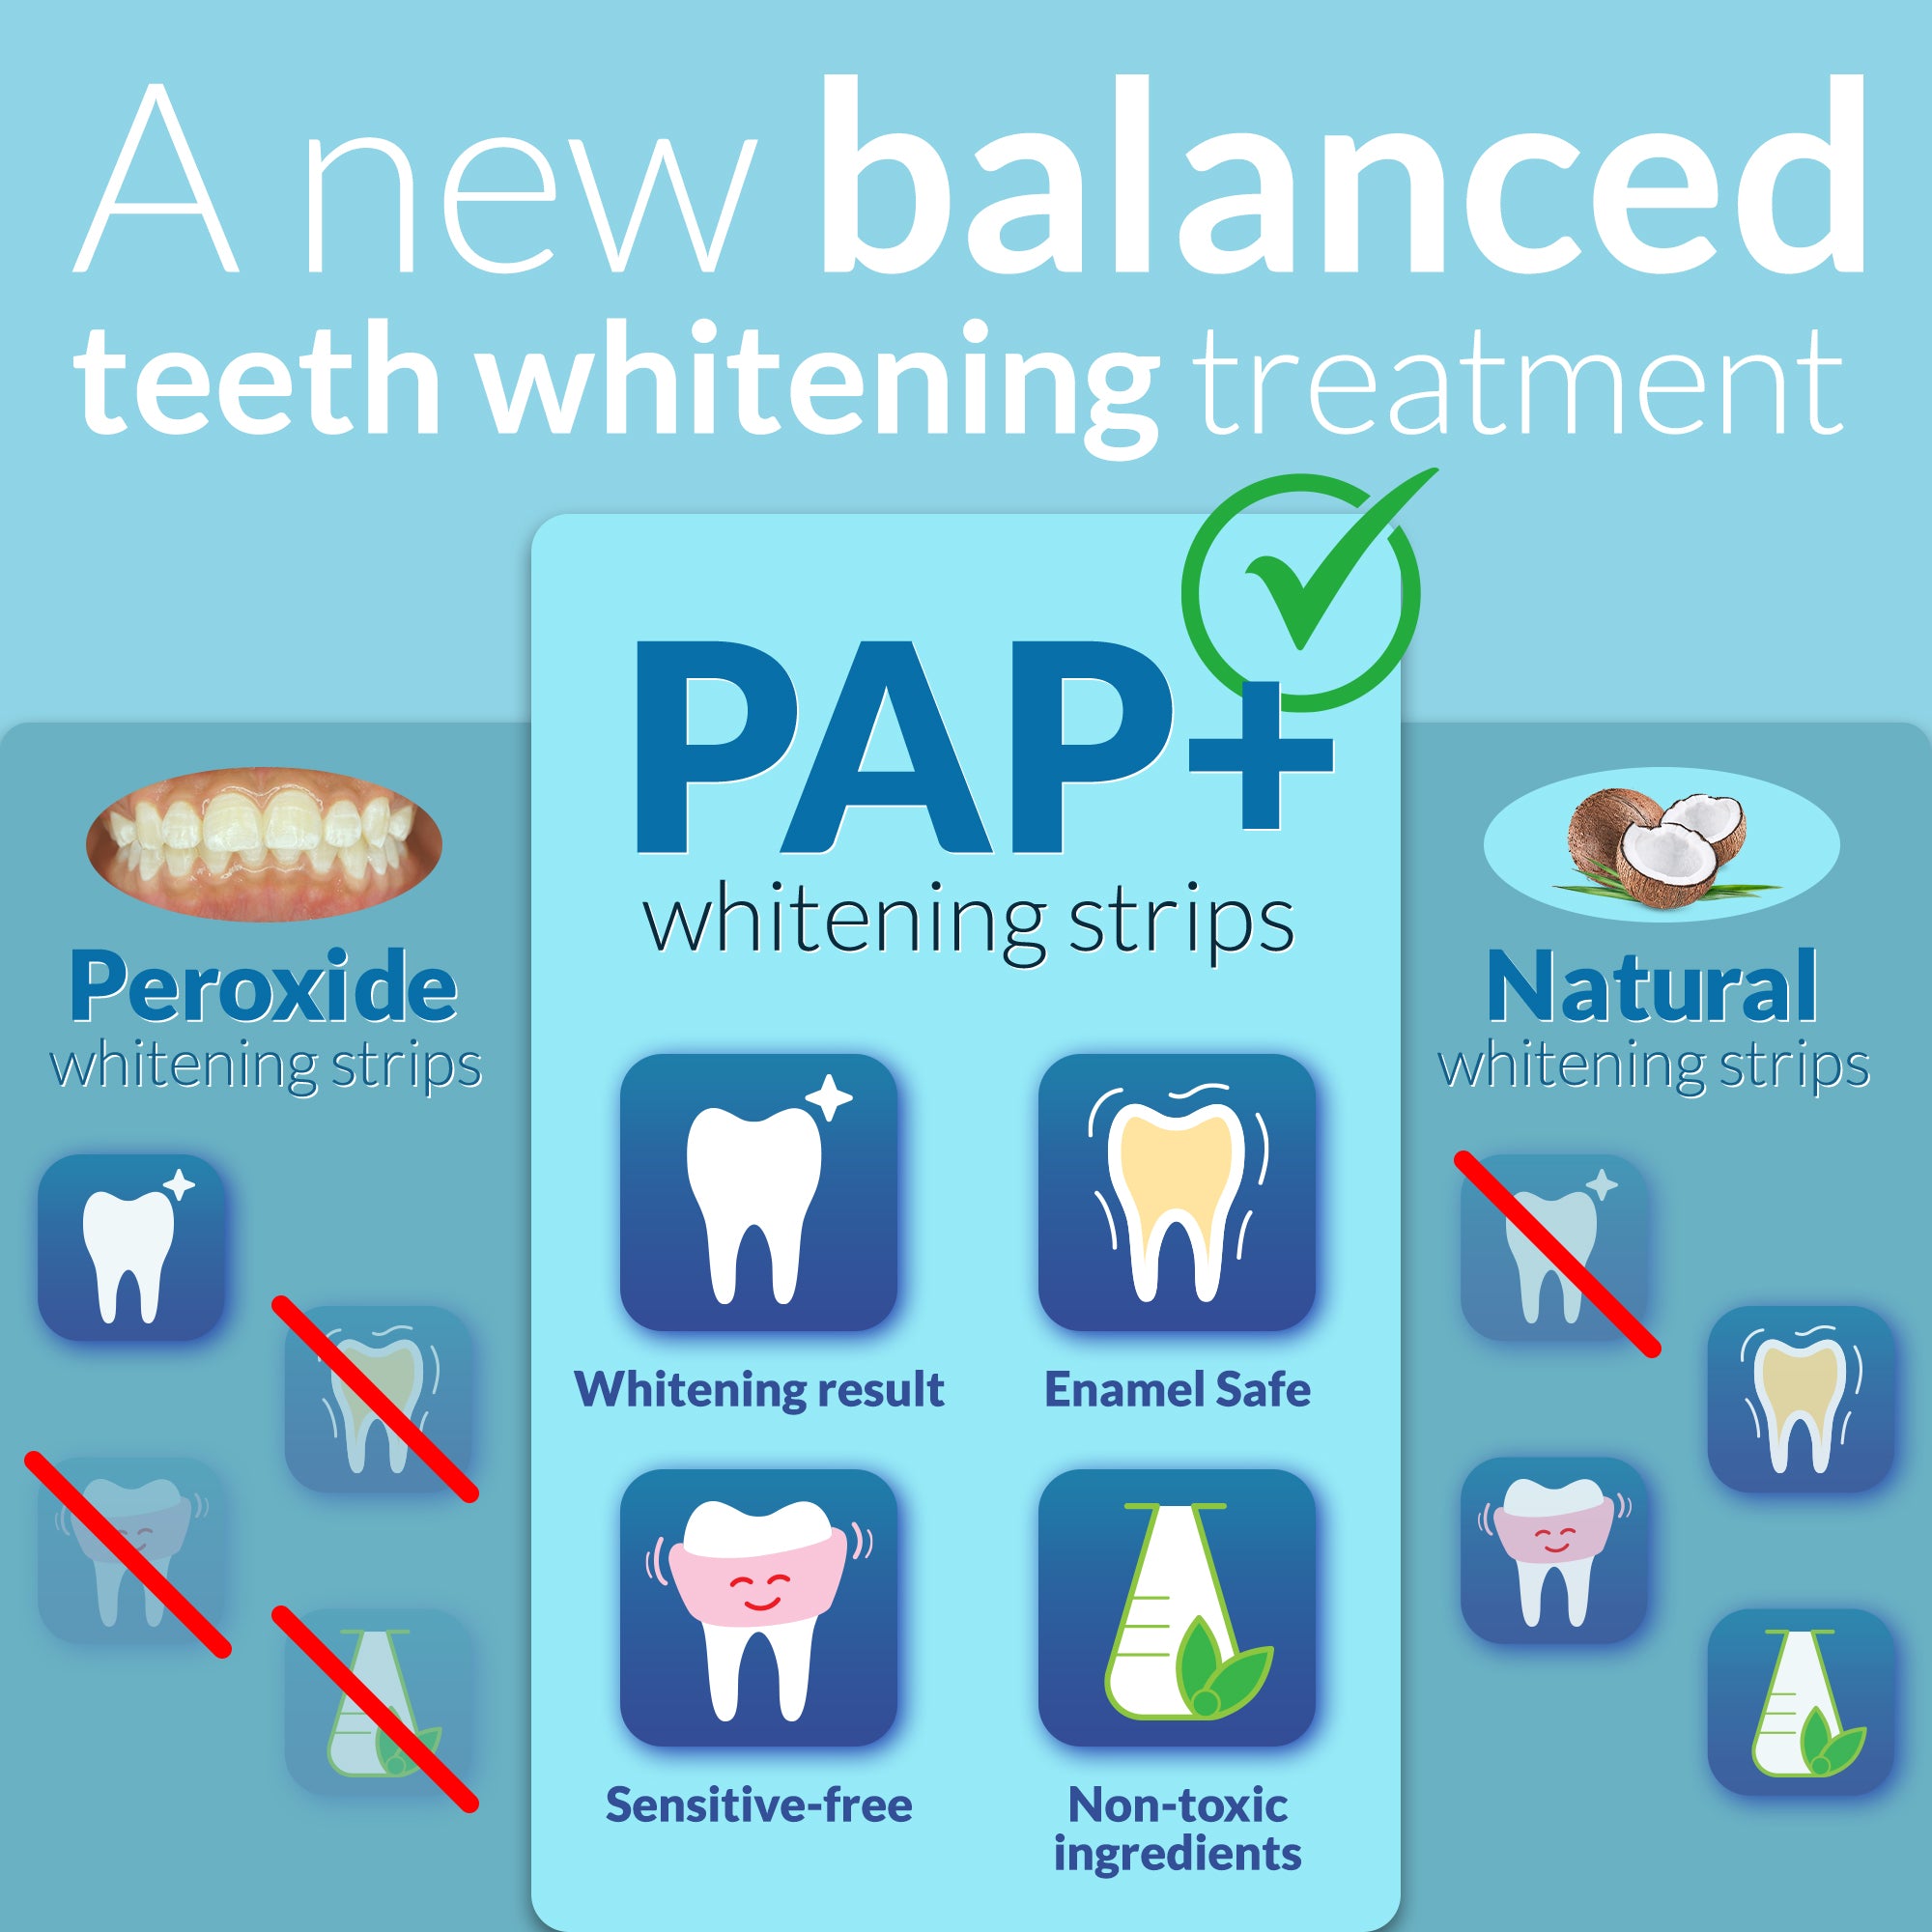 Dentist Formulated PAP+ Teeth Whitening Strips, 7 Treatments (14 Strips)